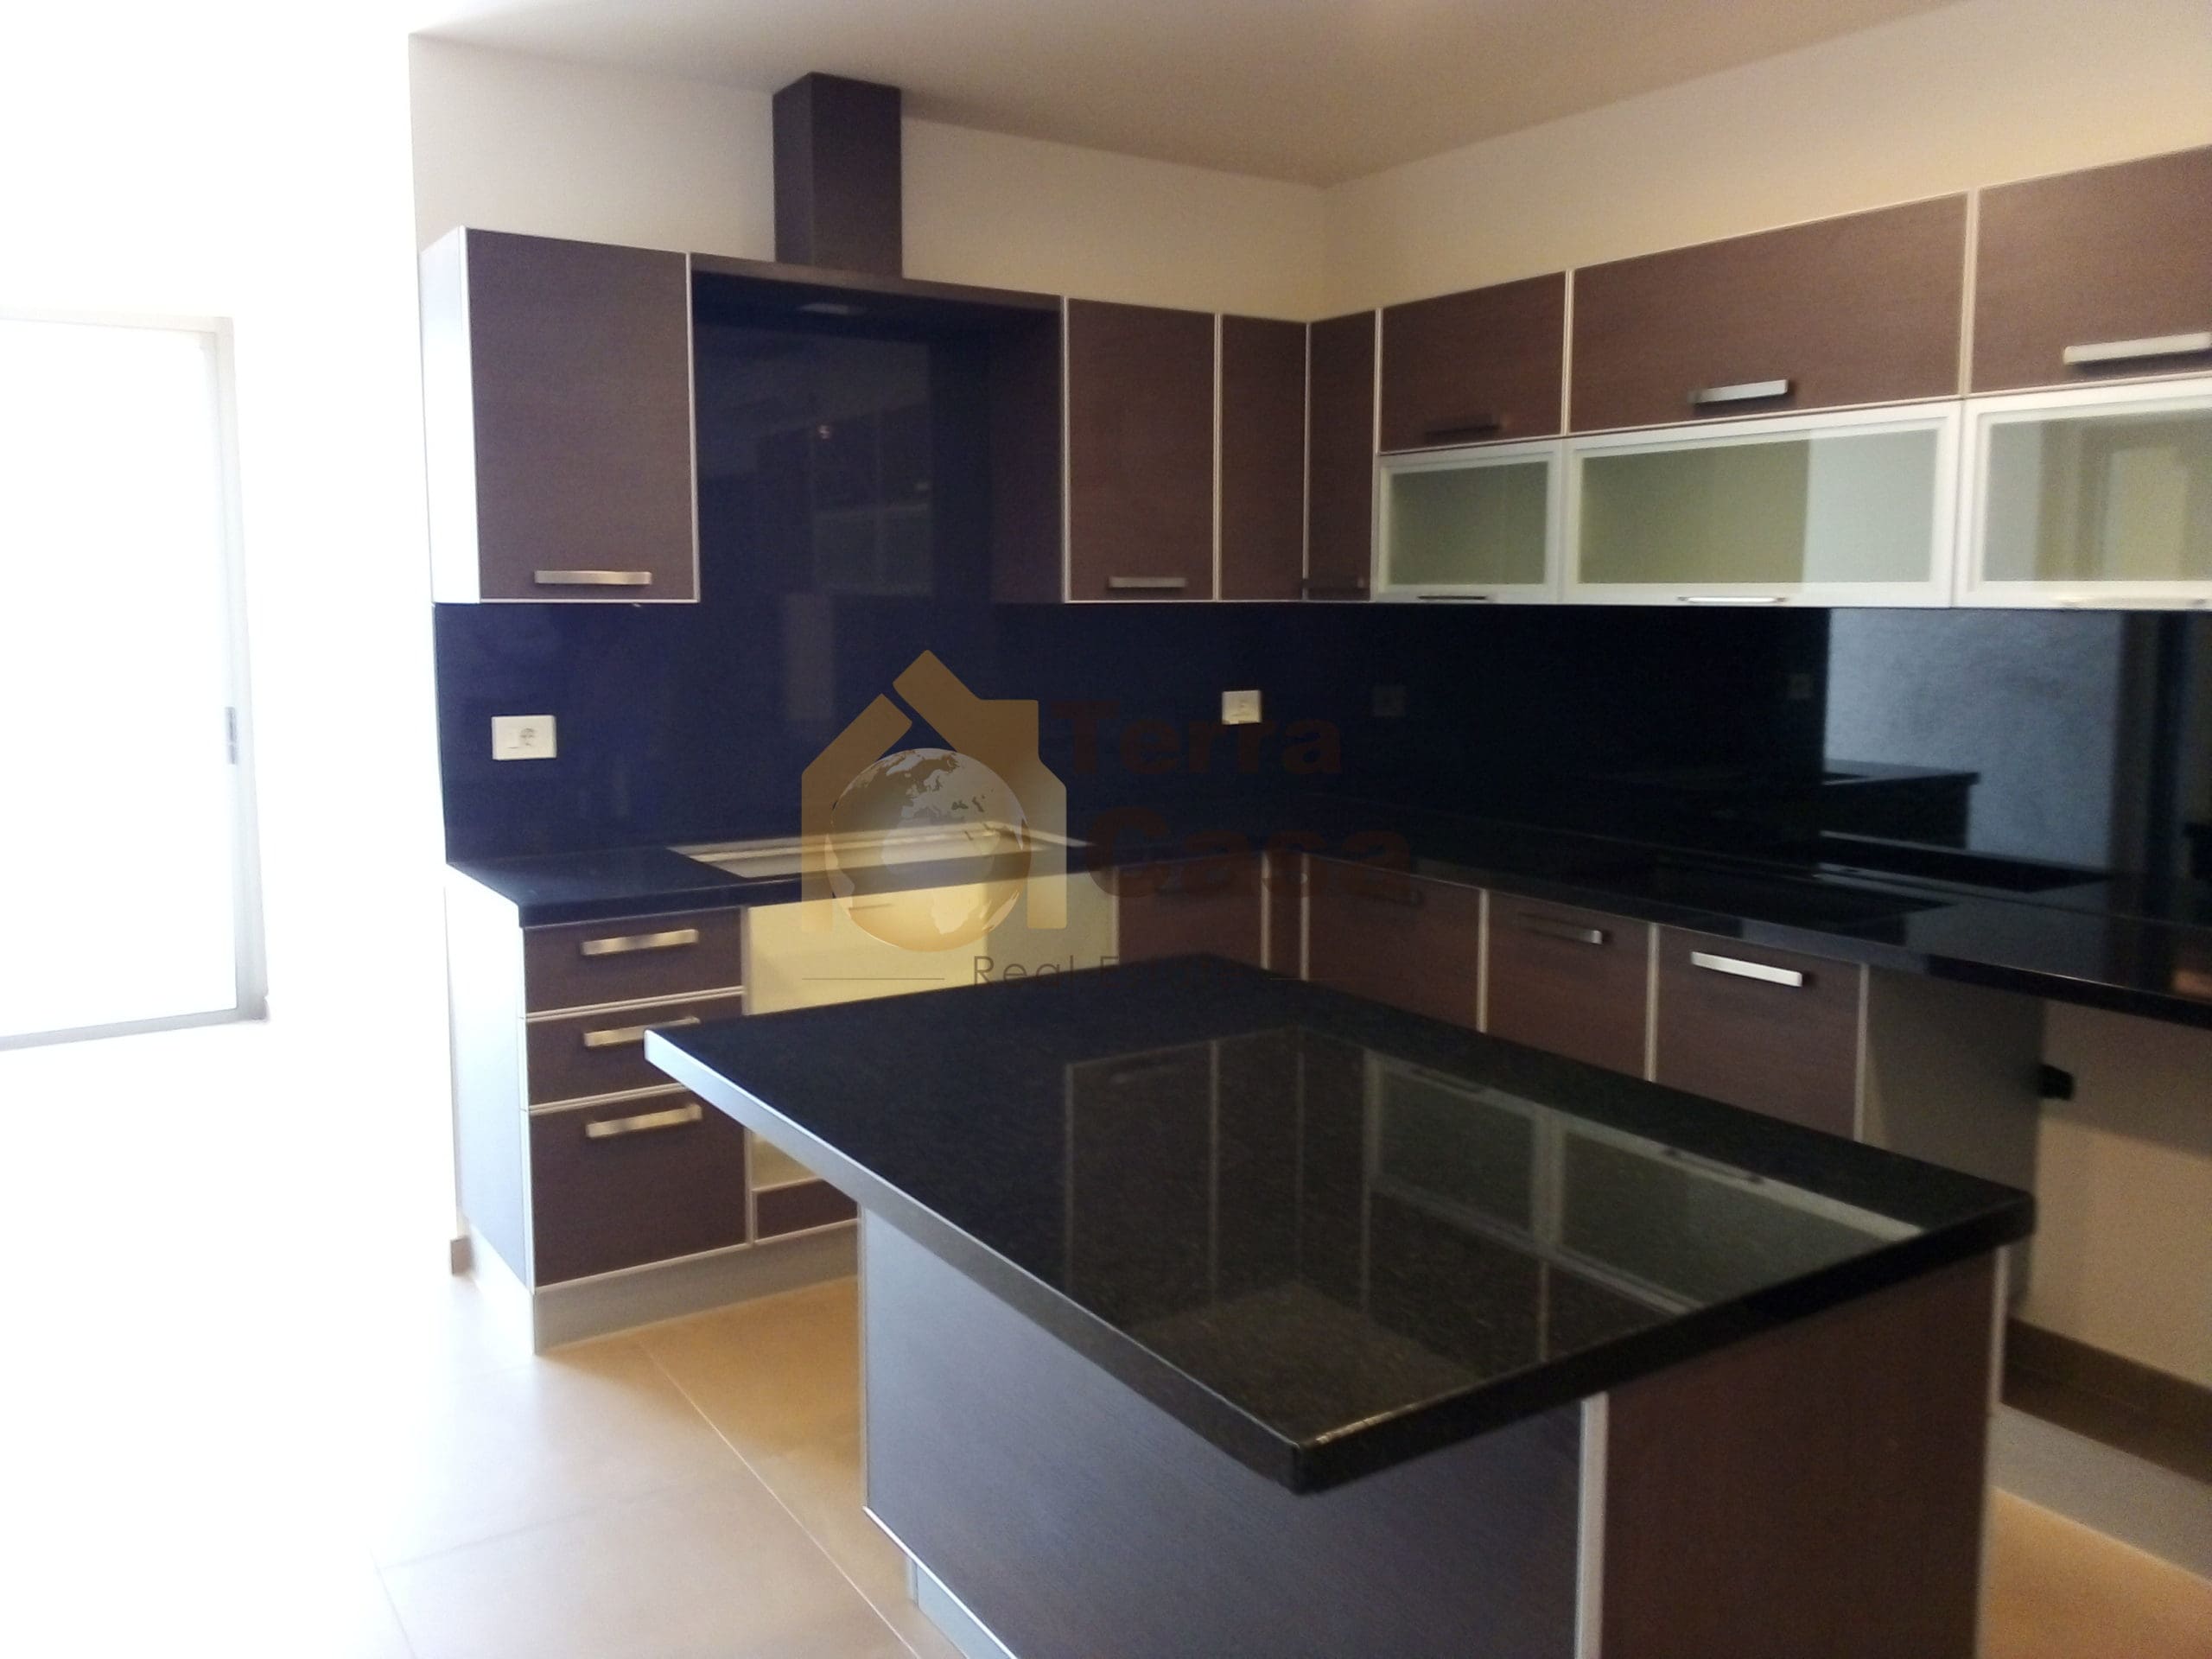 Apartment for sale in louaize brand new with 400 sqm garden.